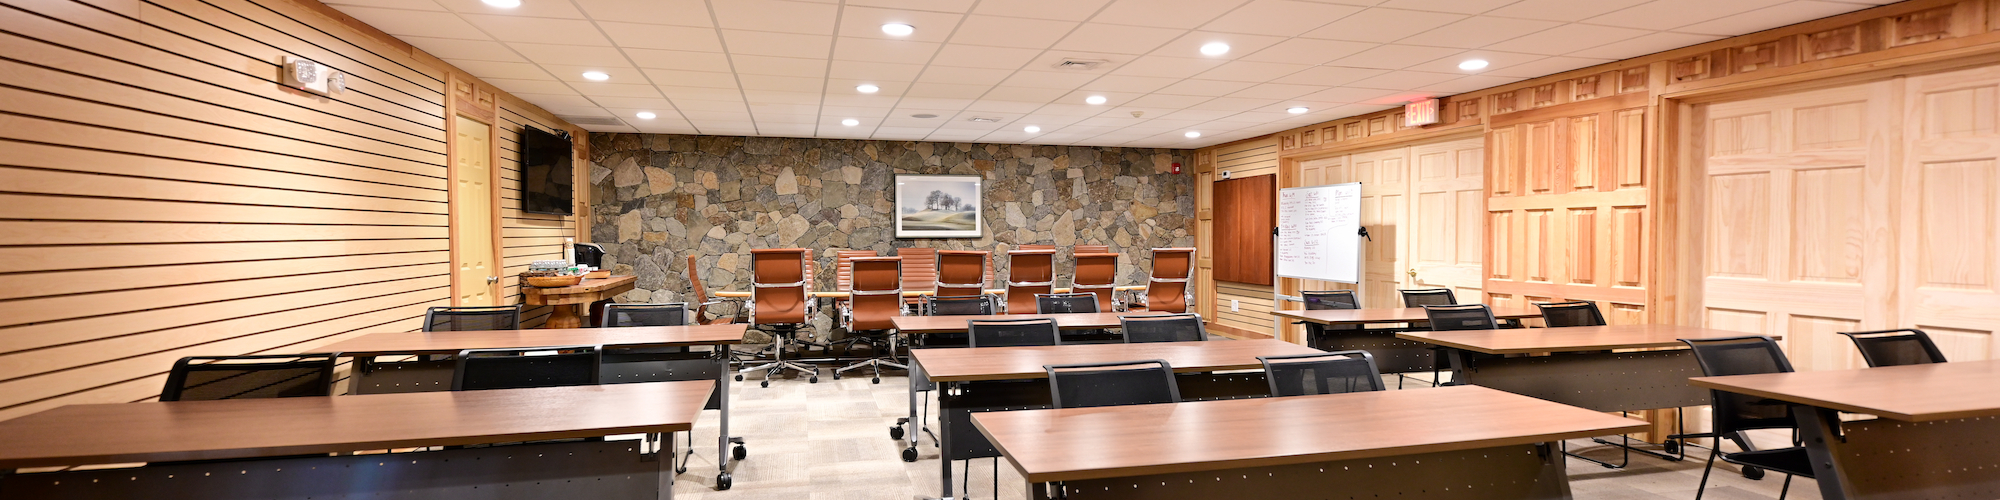 The spacious and well-appointed Main Lodge Conference Room at The Preserve Resort & Spa, ideal for corporate events and seminars.